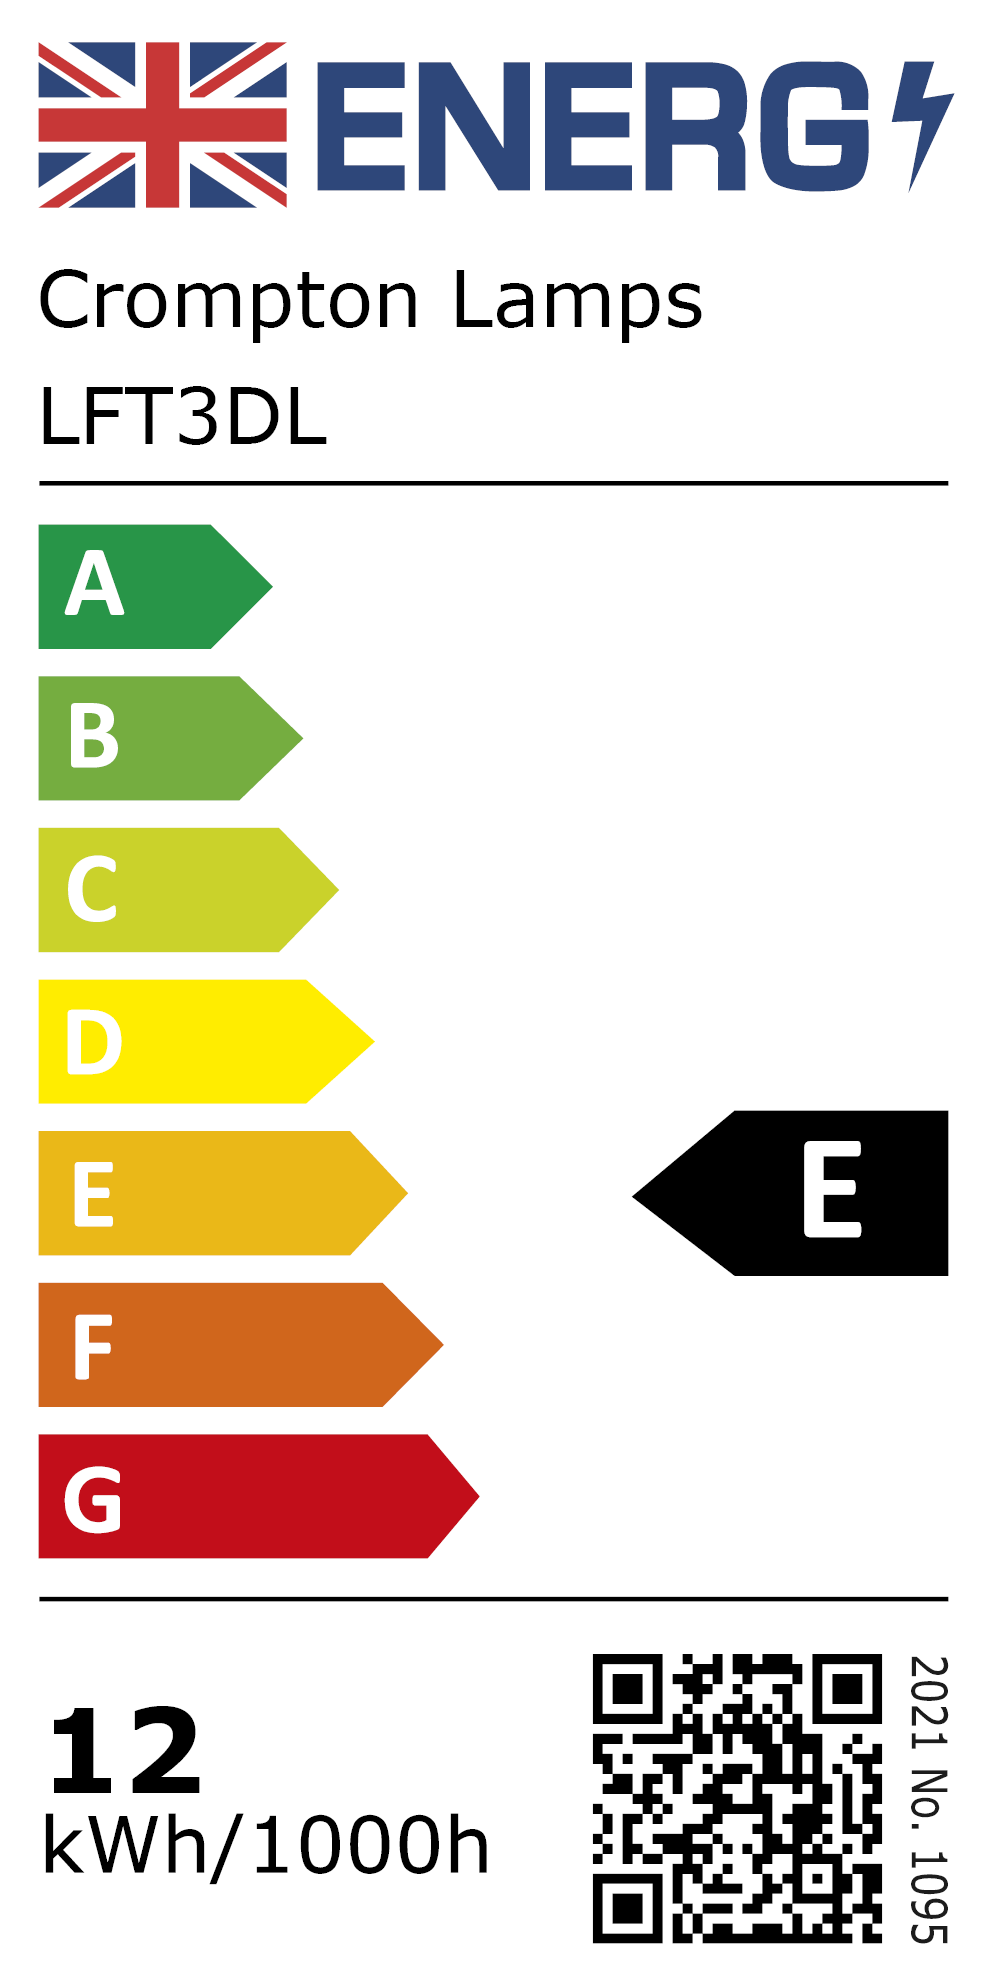 New 2021 Energy Rating Label: Stock Code LFT3DL